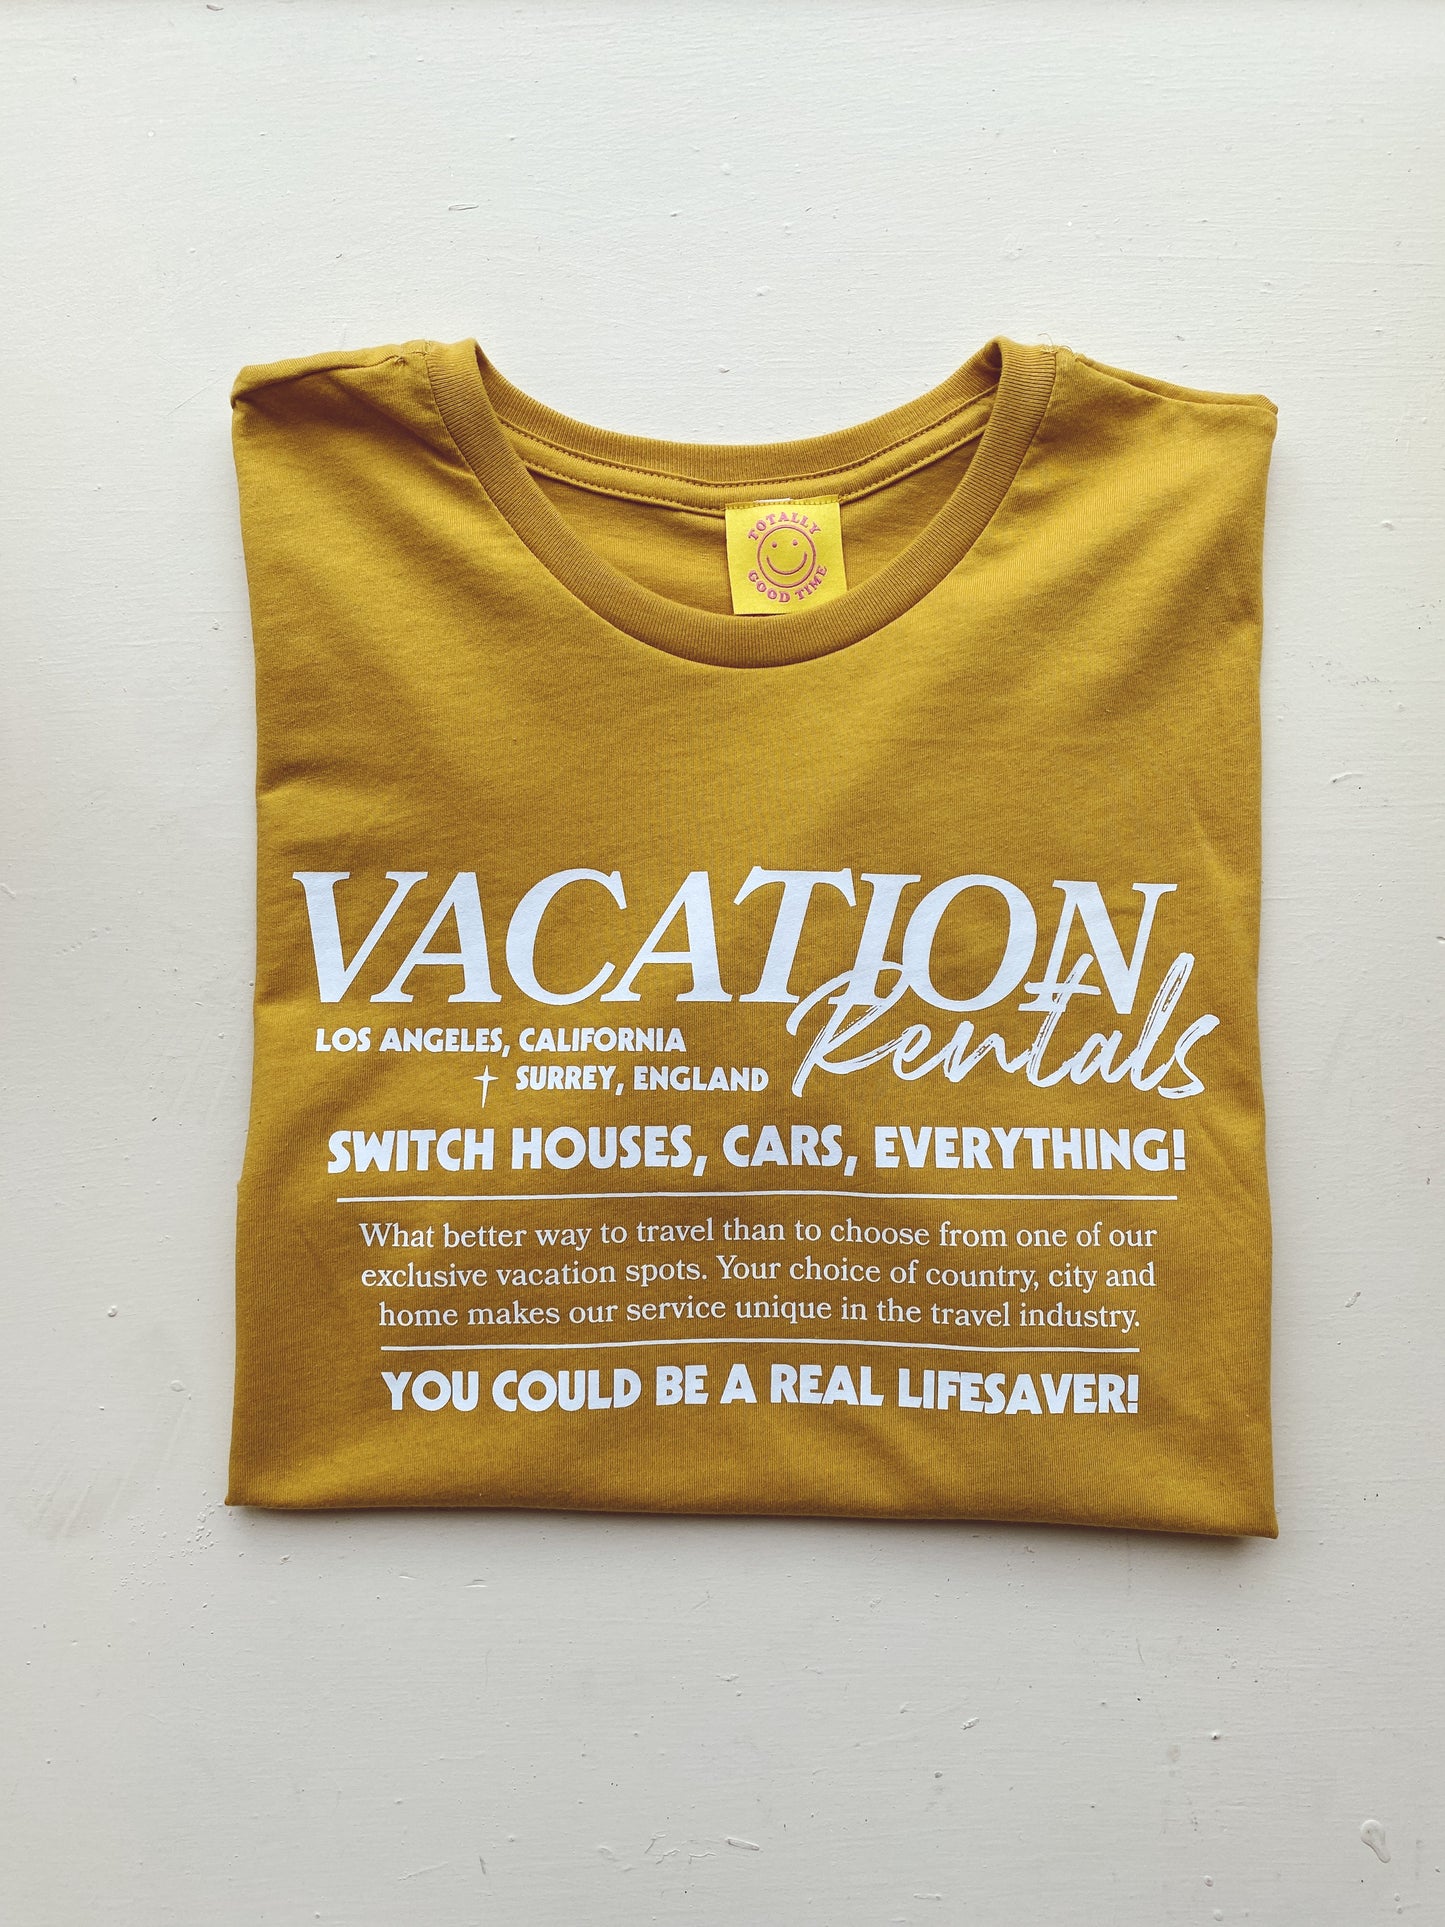 The Holiday Vacation Tee